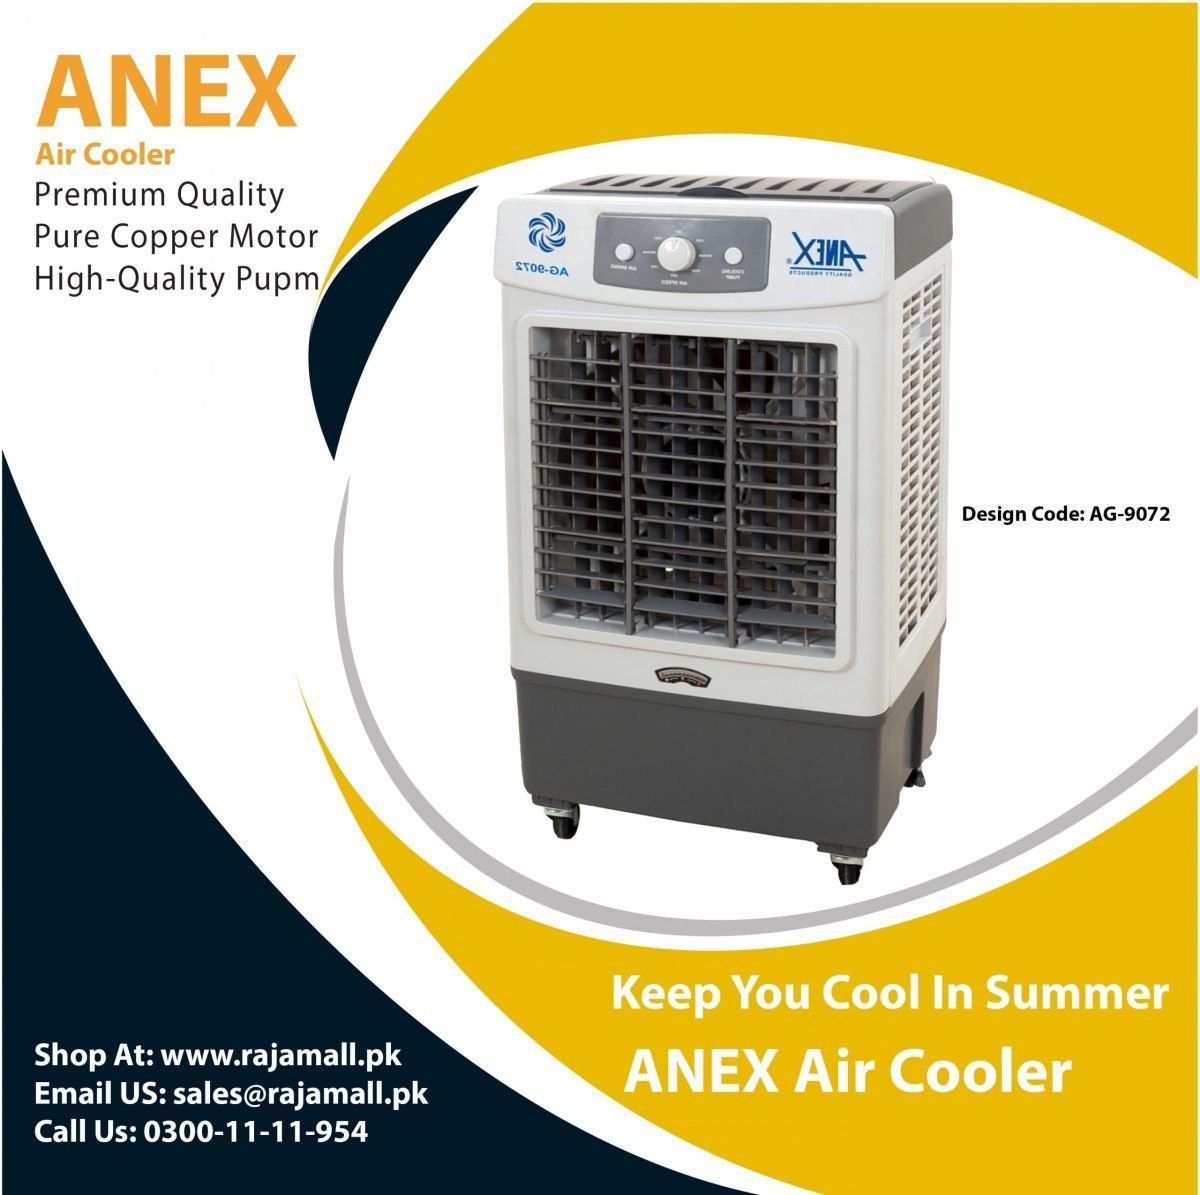 Anex Deluxe Room Air Cooler AG-9072